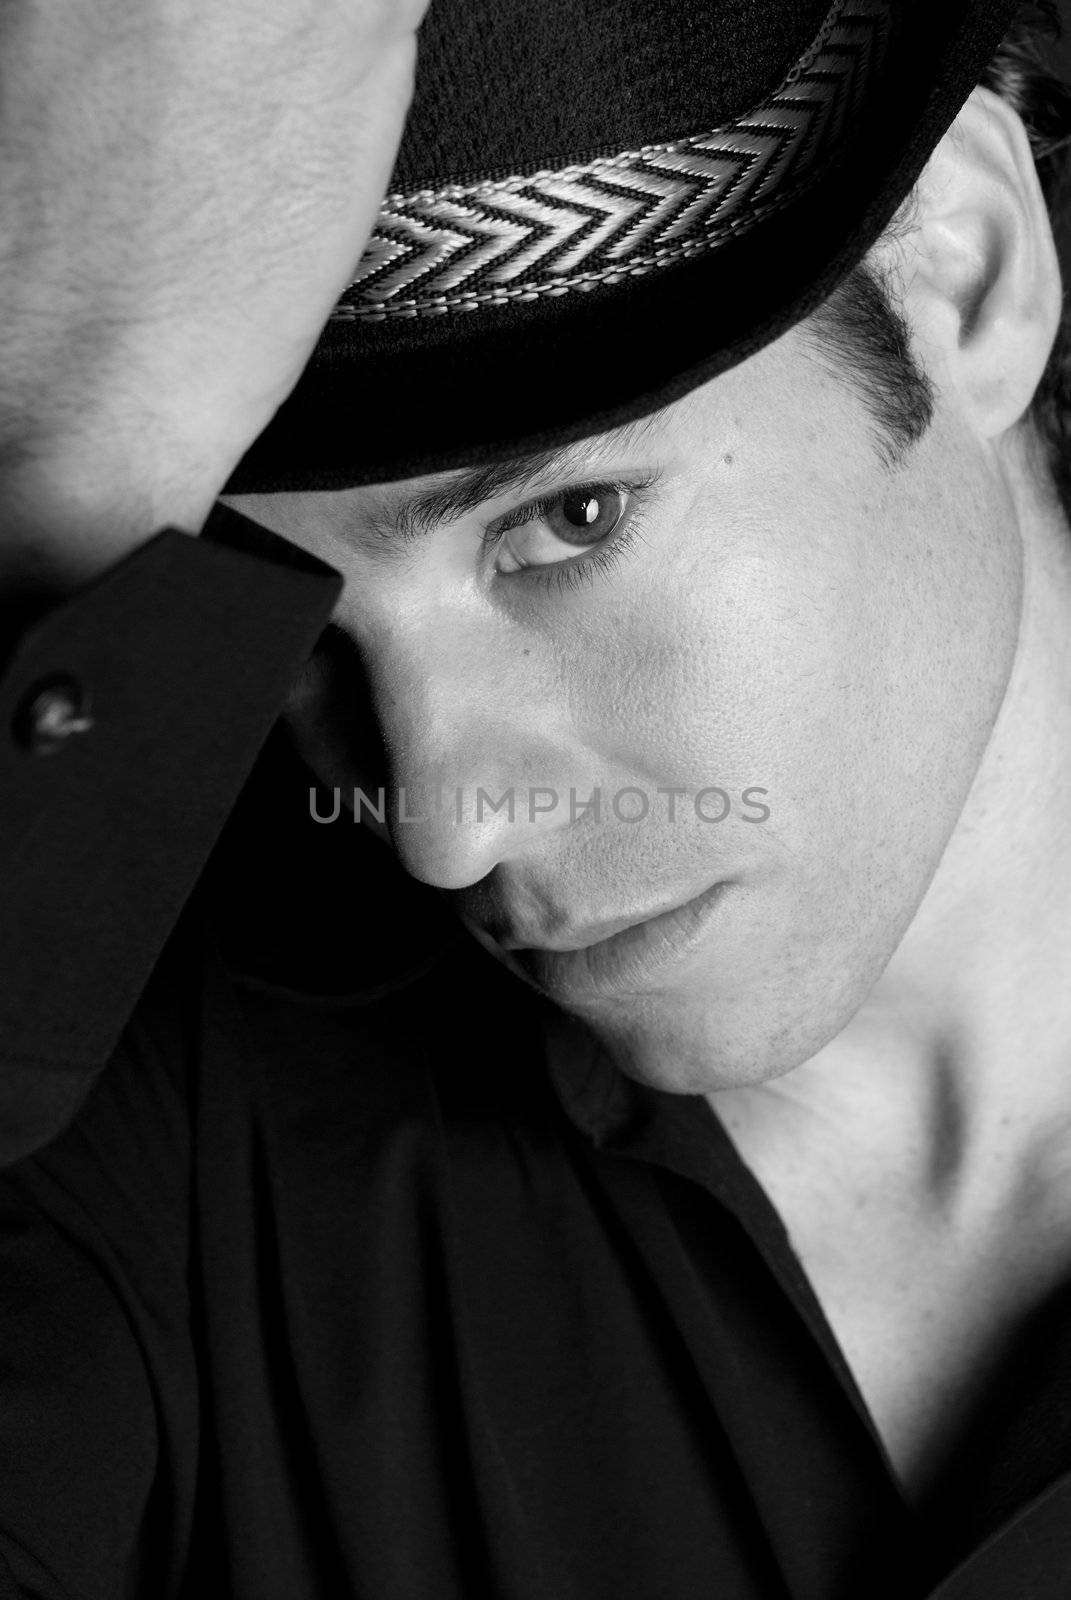 Handsome man portrait with hat black and white